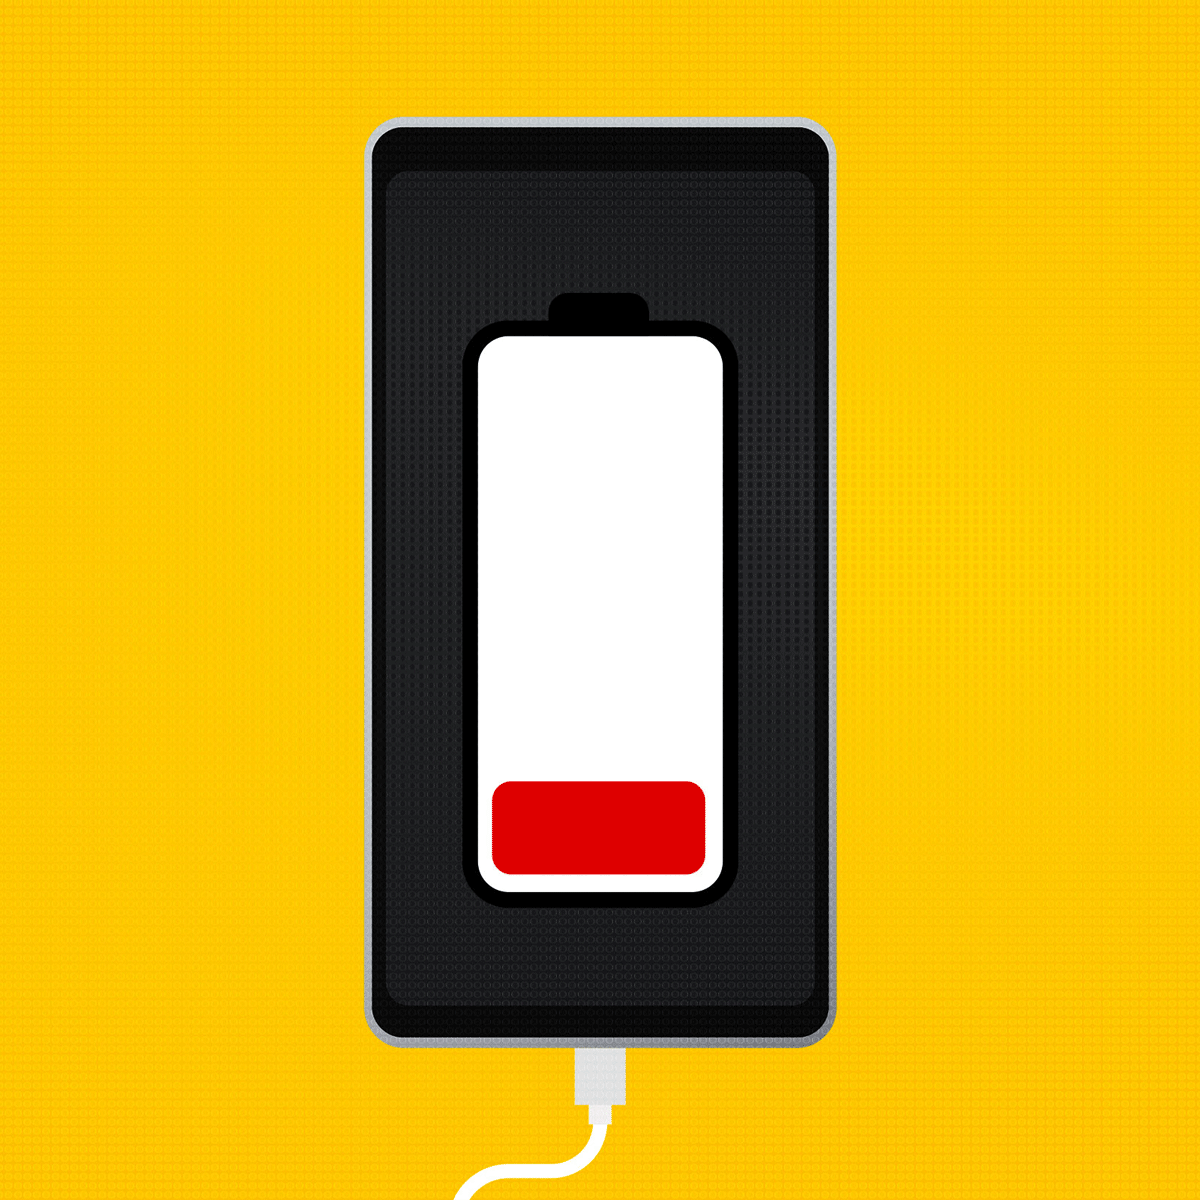 How to Make Your Phone Charge Faster: 14 Tips from Tech Pros